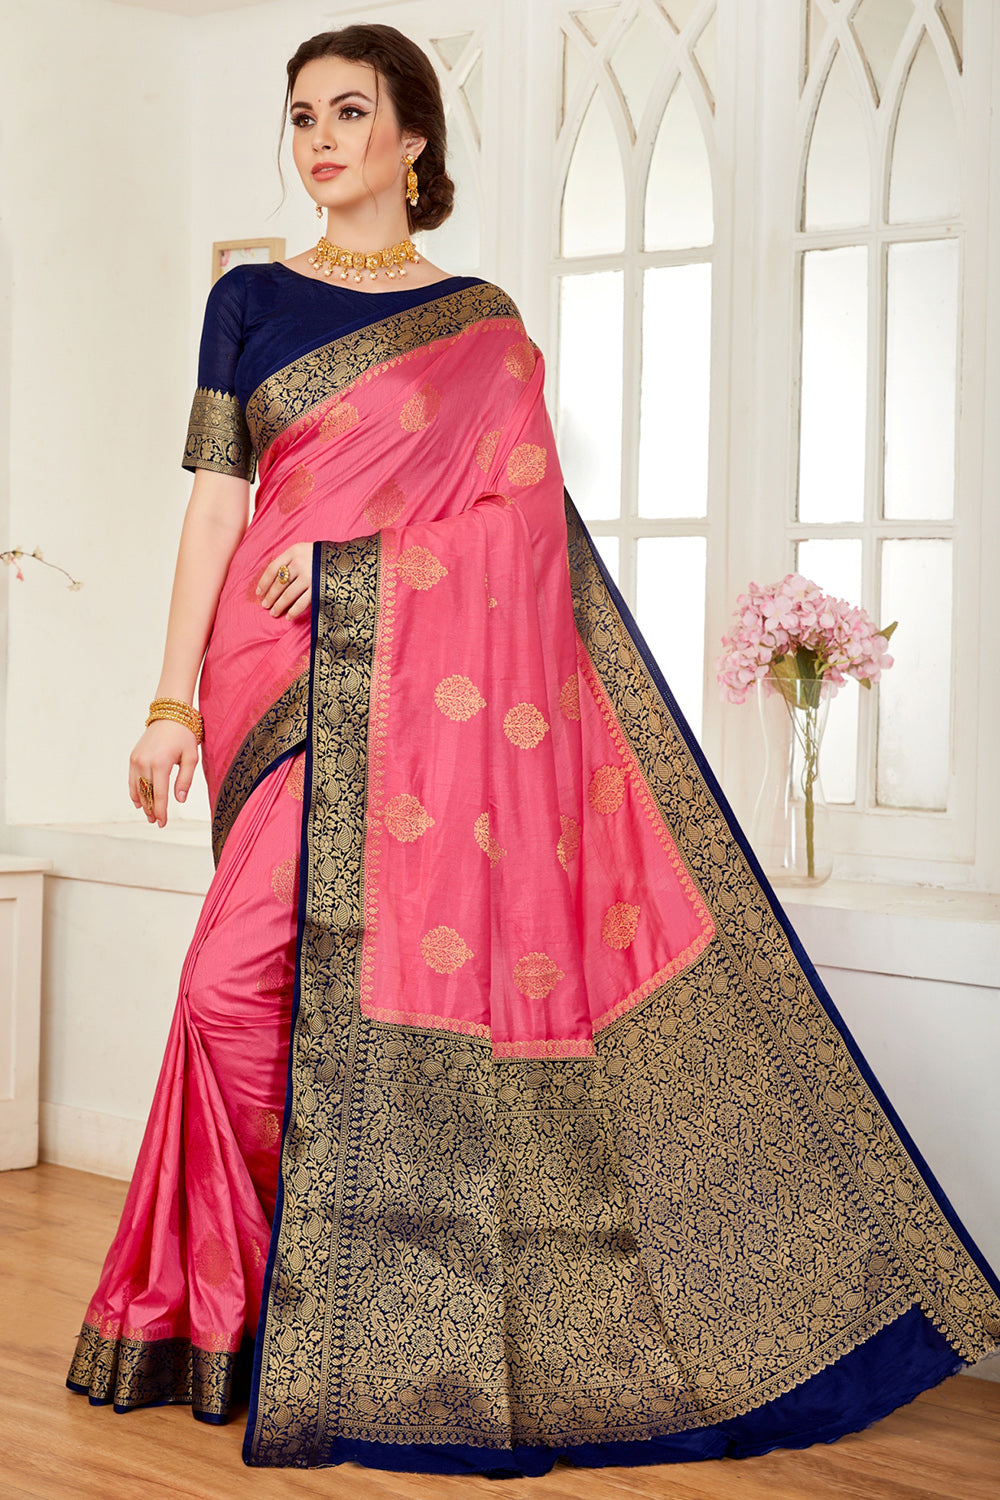 Buy Randal Fashion Women's Pink And Blue Banarasi Saree with Blouse Piece  at Amazon.in